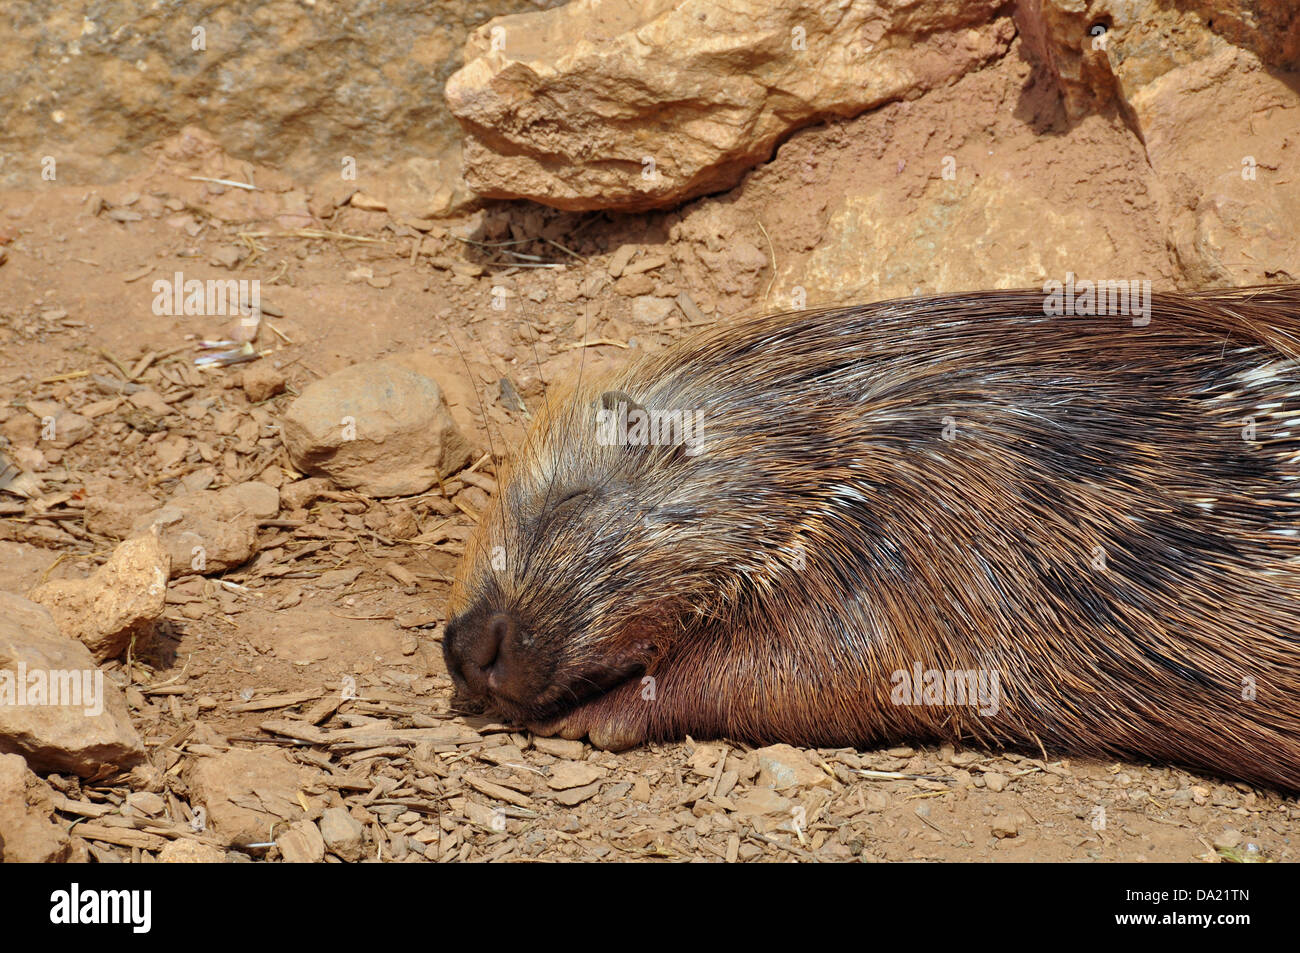 Indian crested porcupine resting on a hot sunny day. Sleeping animal. Stock Photo